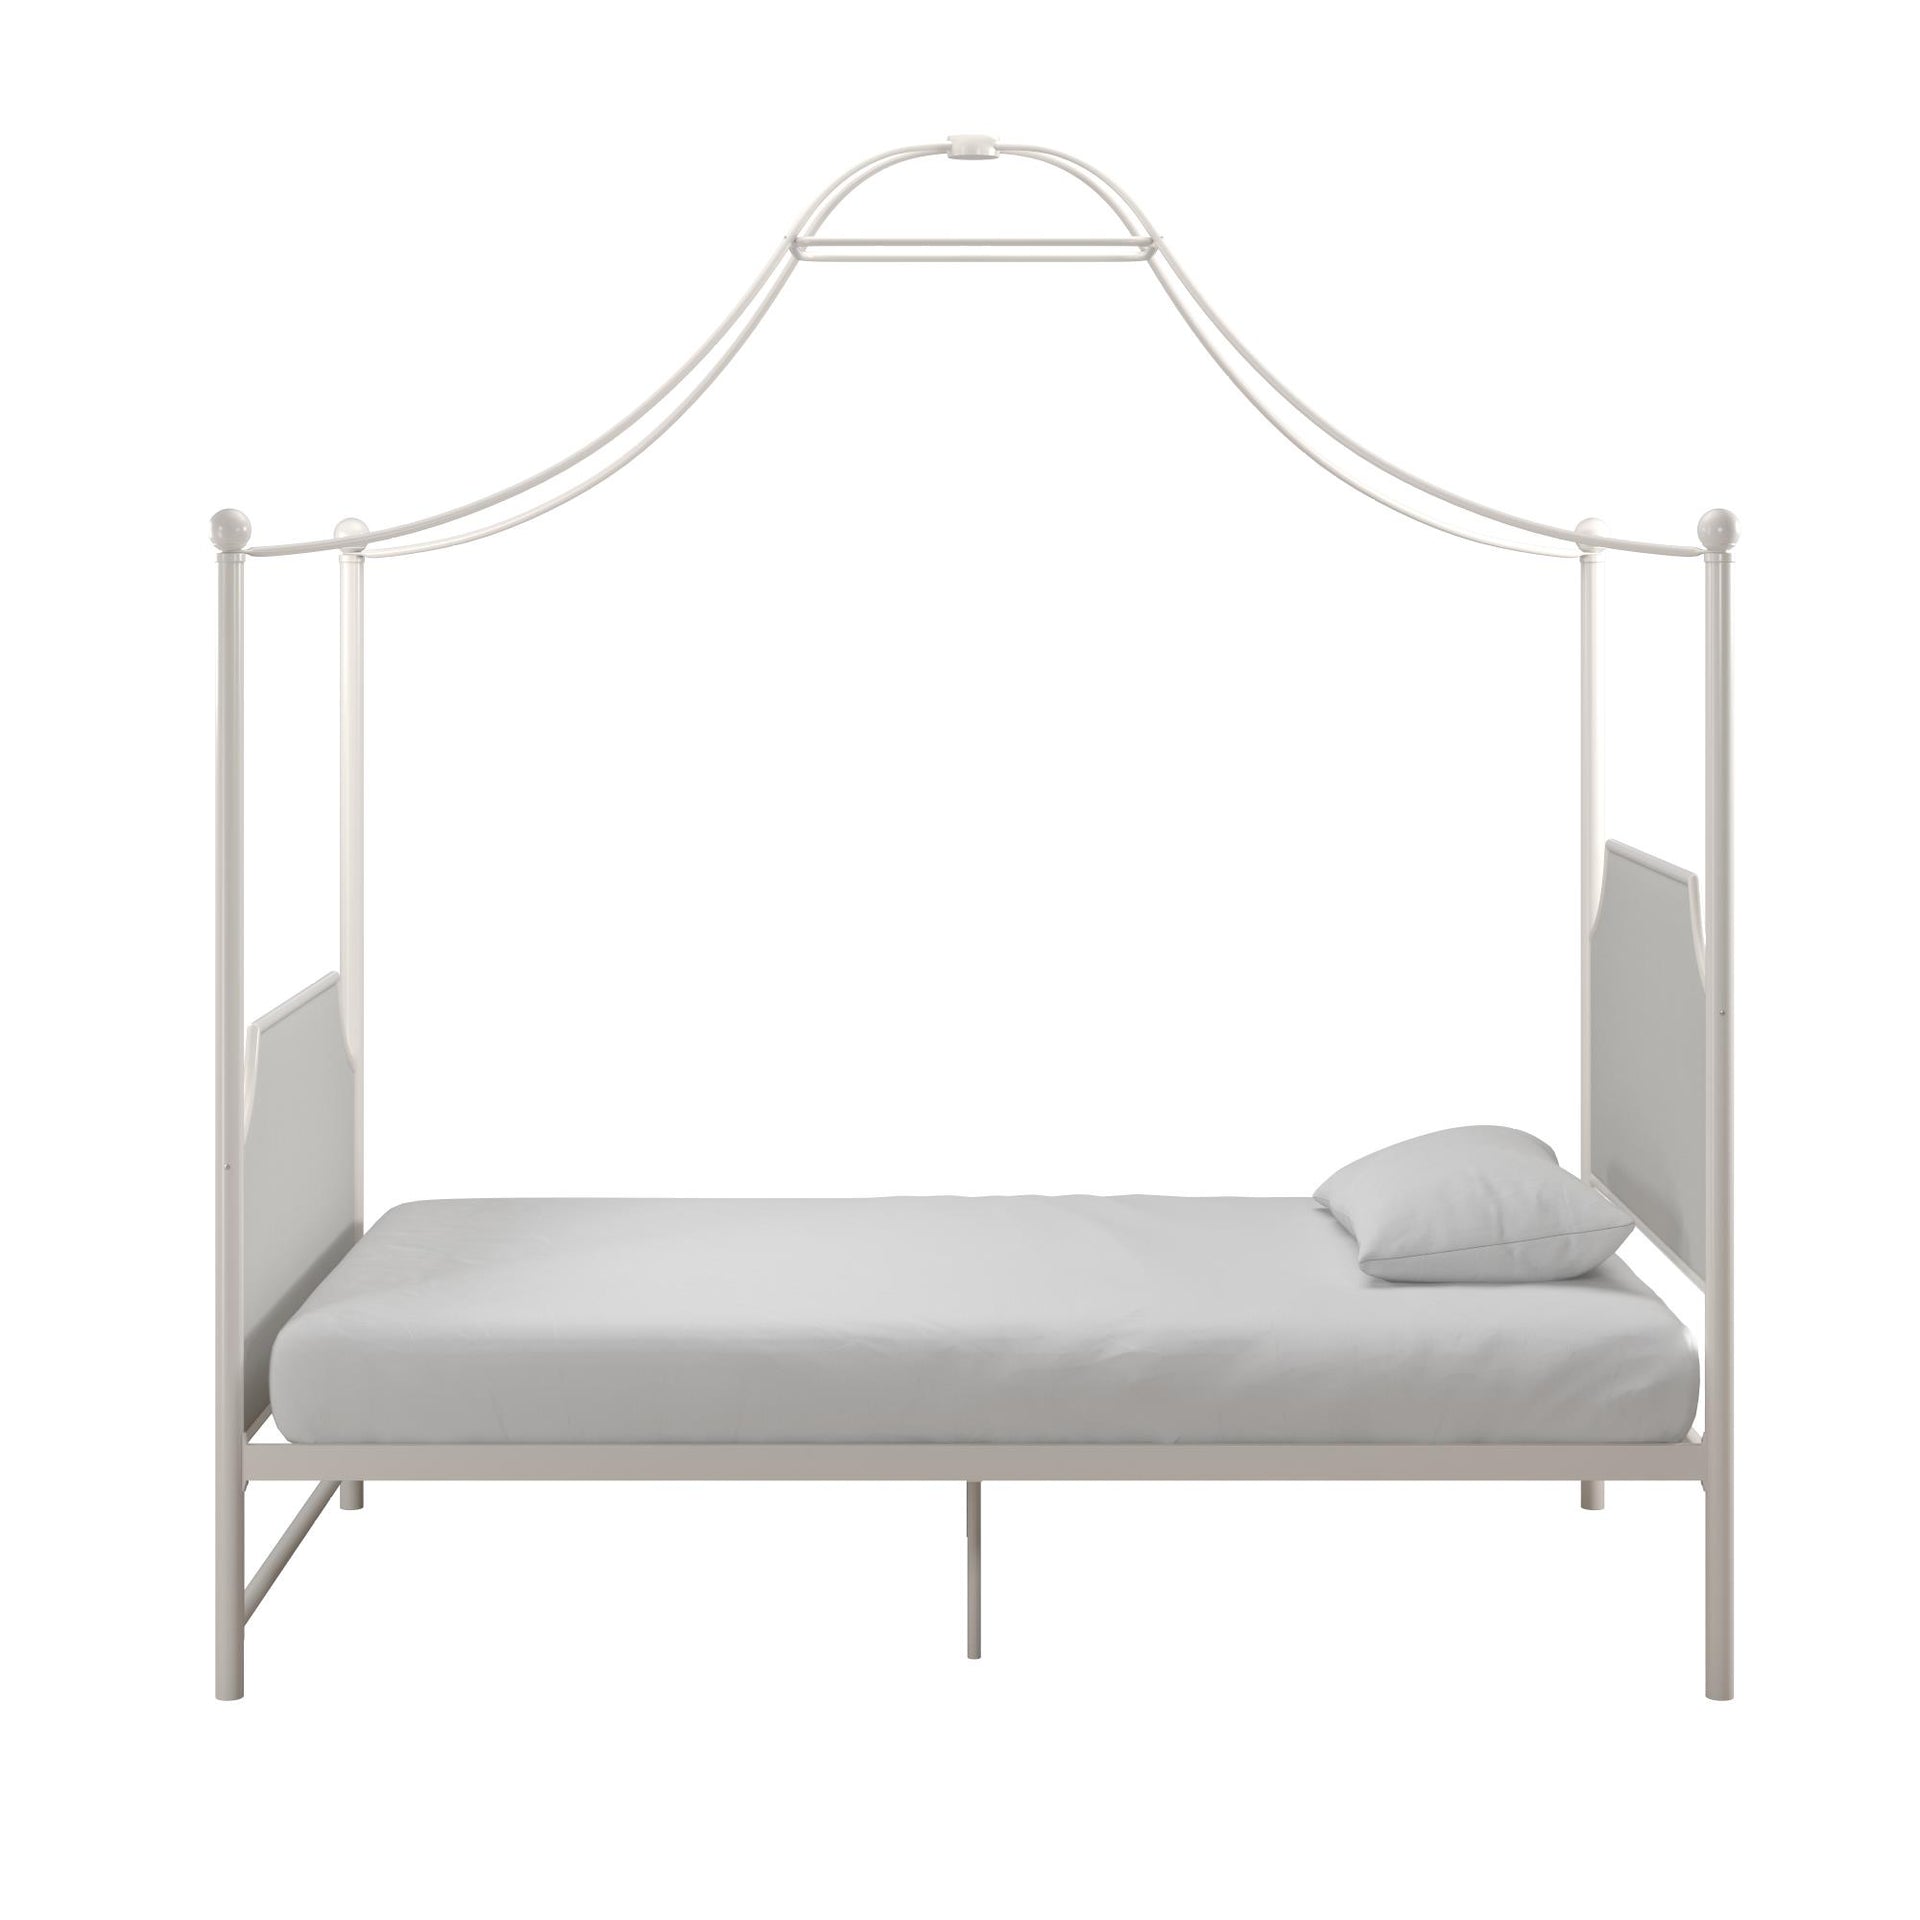 Little Seeds Monarch Hill Clementine Canopy Bed - White - Twin